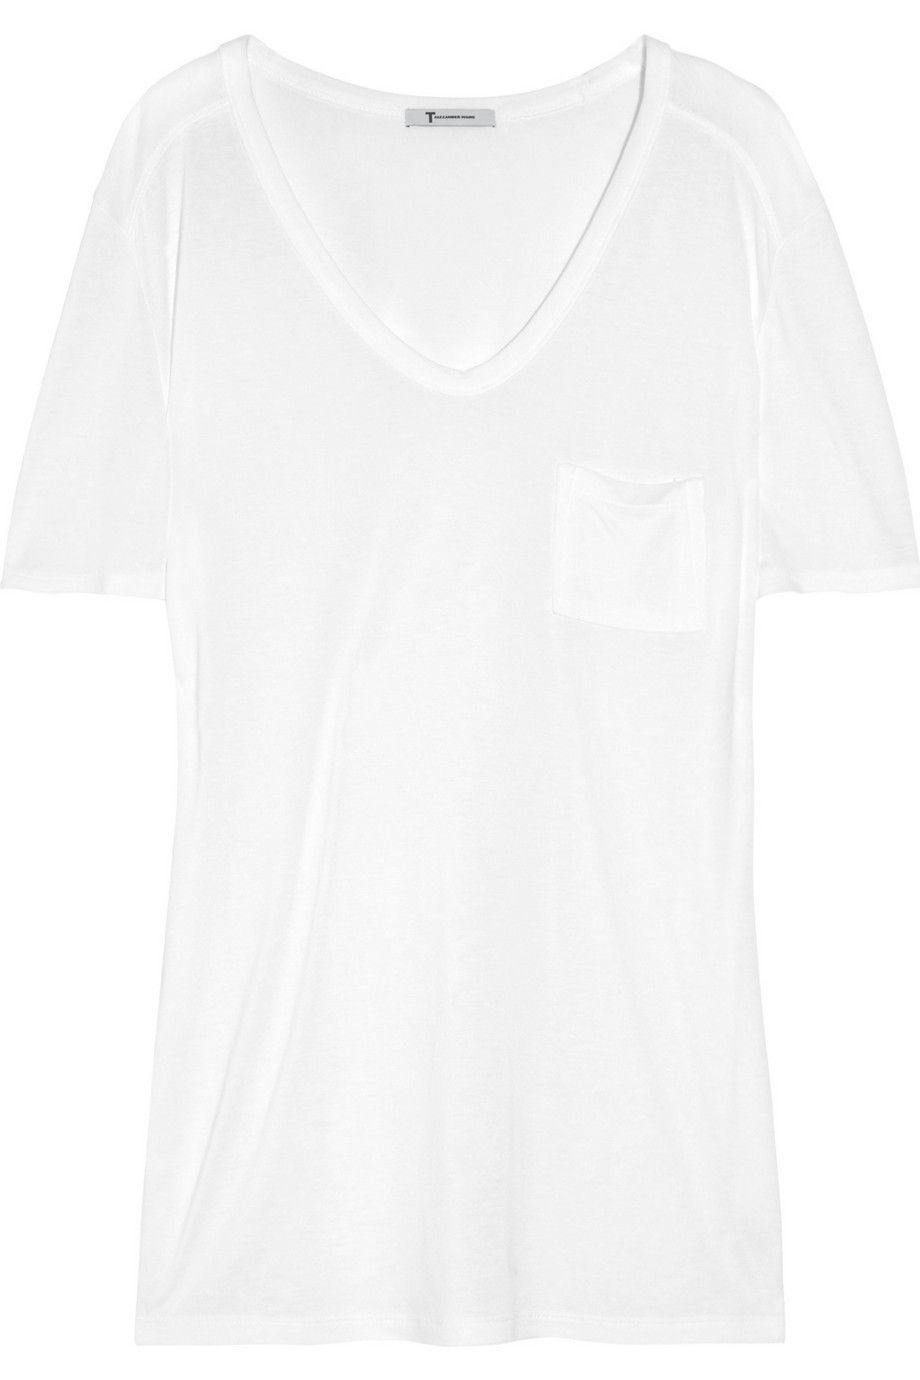 Product, Sleeve, White, Grey, Active shirt, Top, Day dress, 